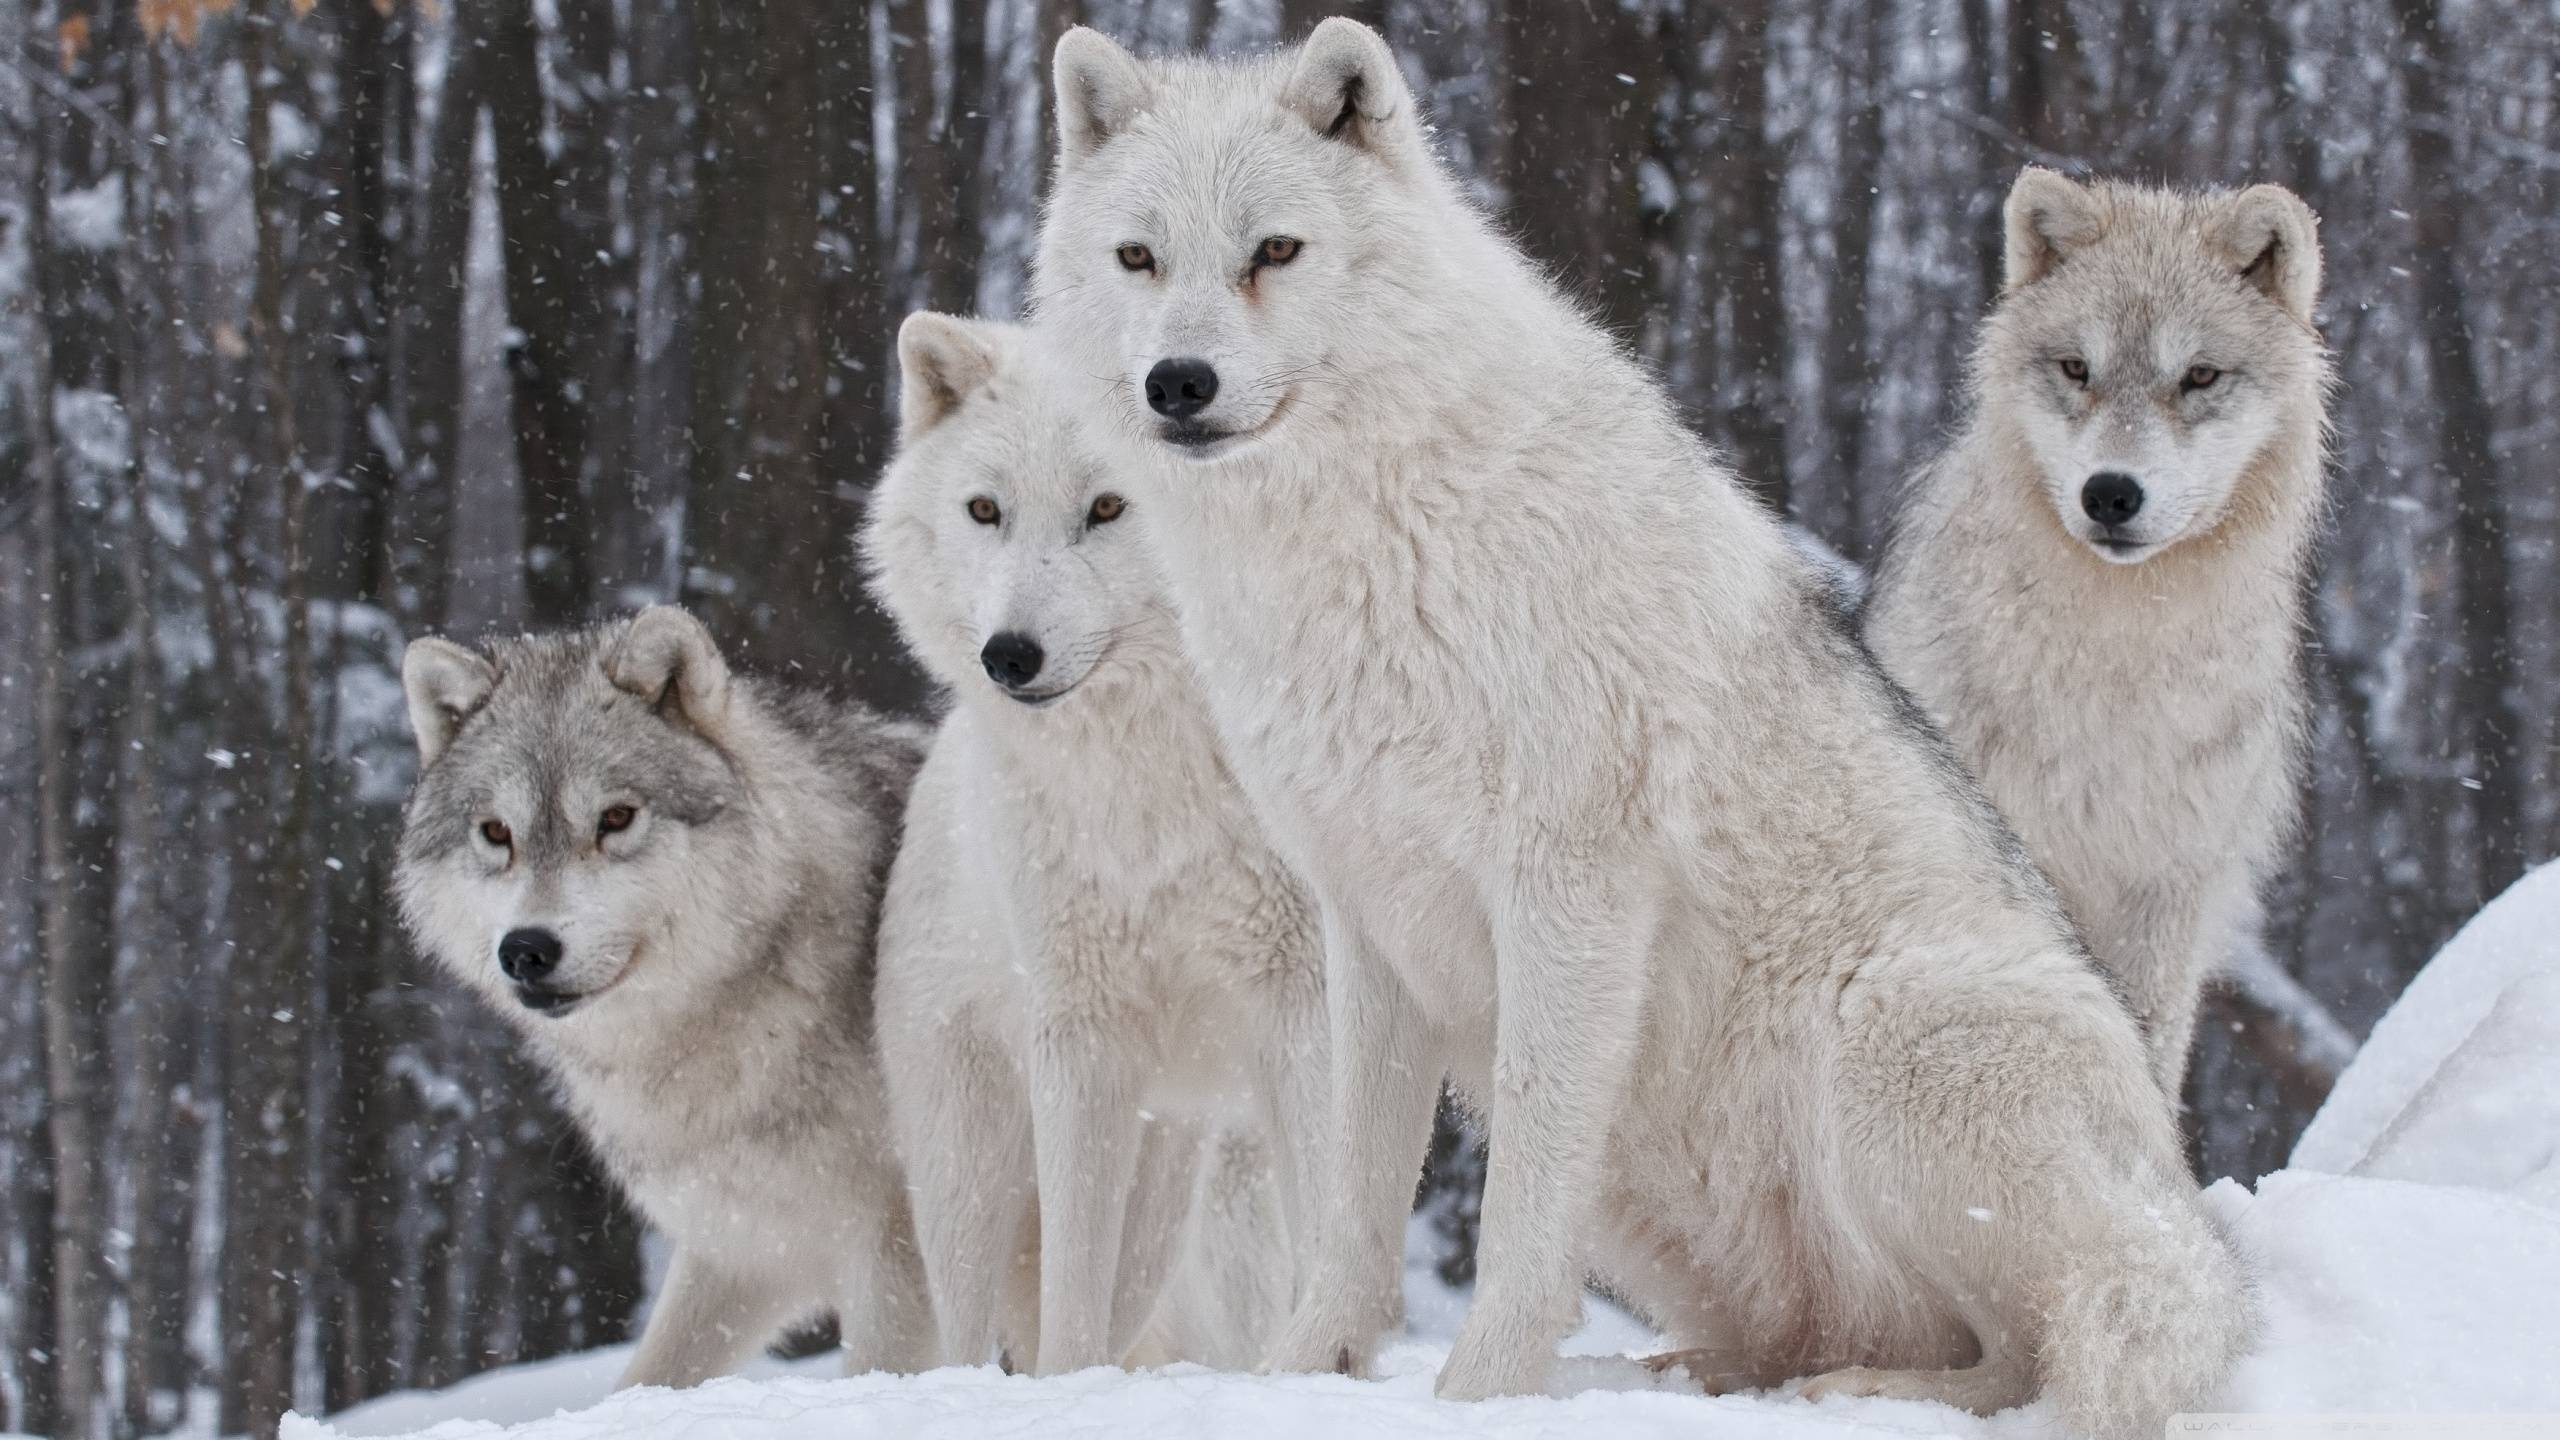 Gray Wolf: A social animal, A pack of wolves, A mated pair accompanied by their offspring. 2560x1440 HD Wallpaper.